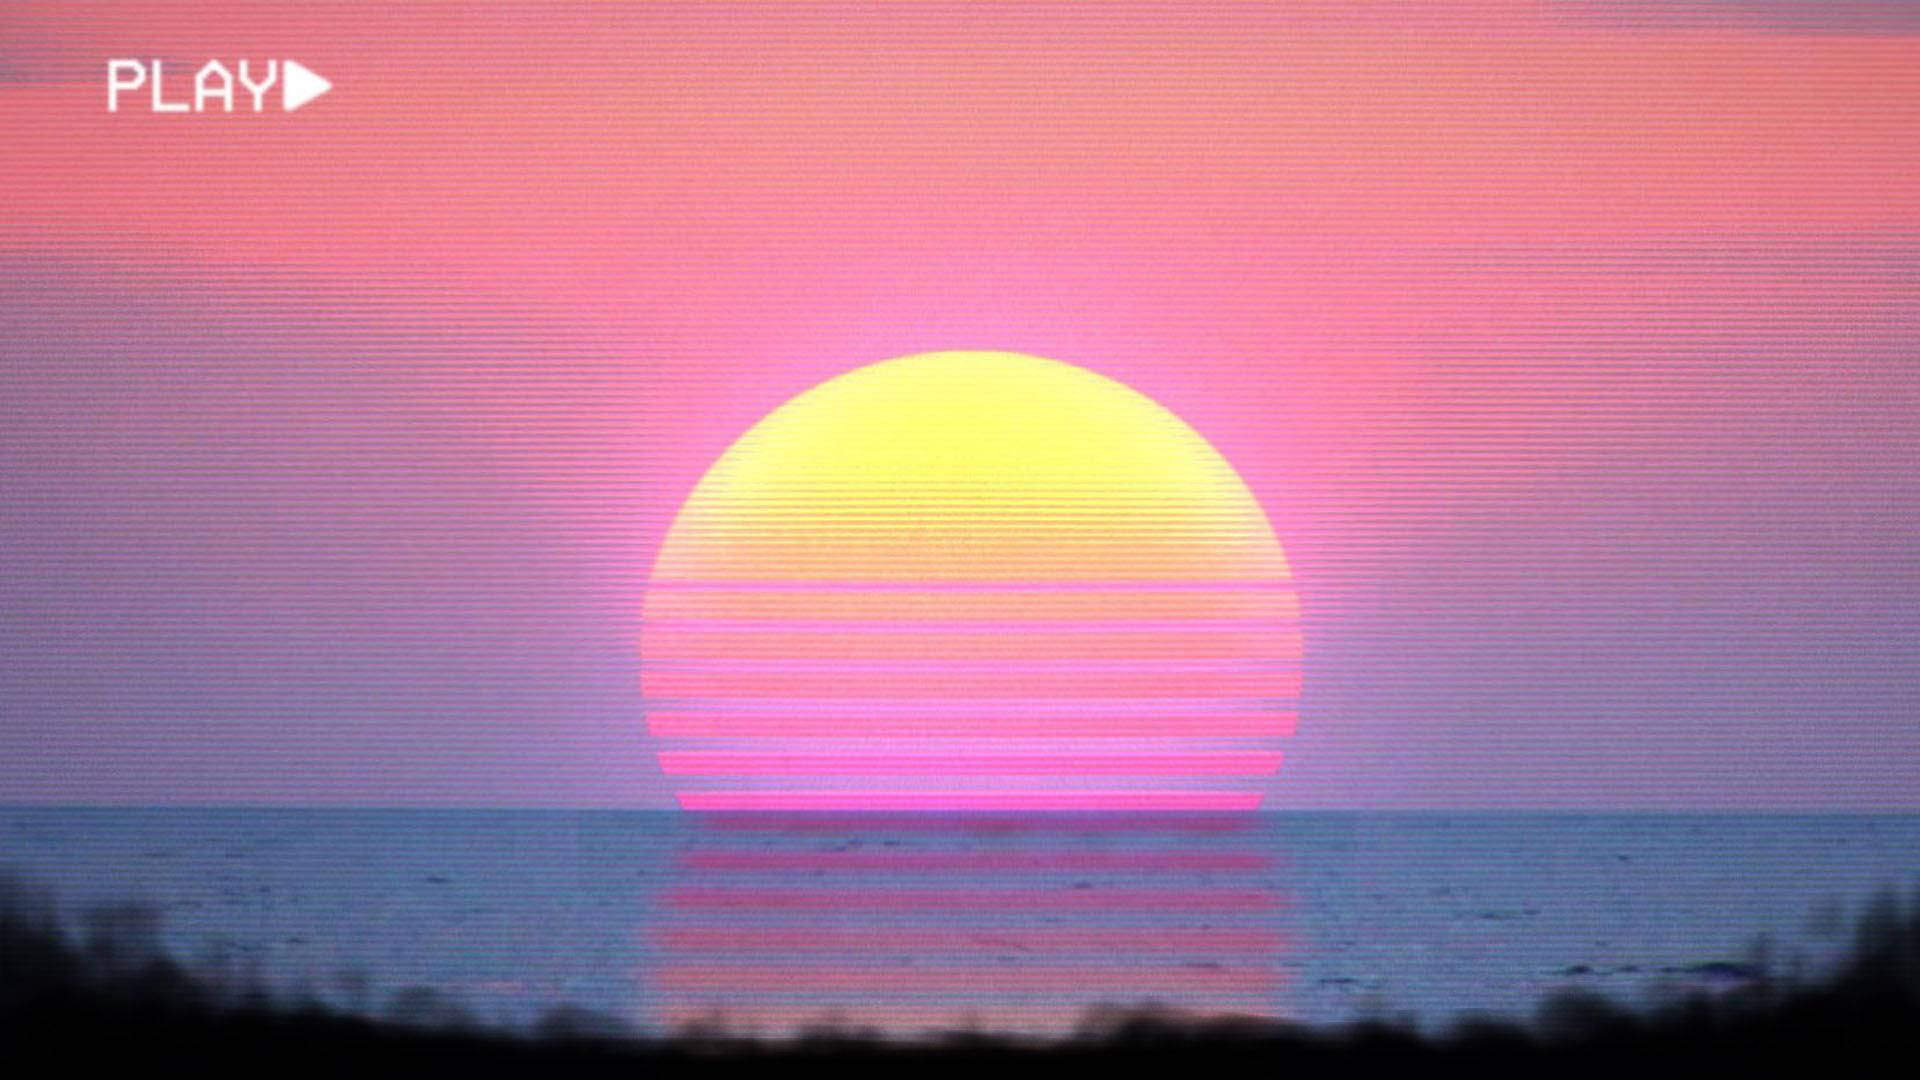 Lovely Aesthetic Profile Picture Of A Sunset In The Ocean With Vaporwave Concept